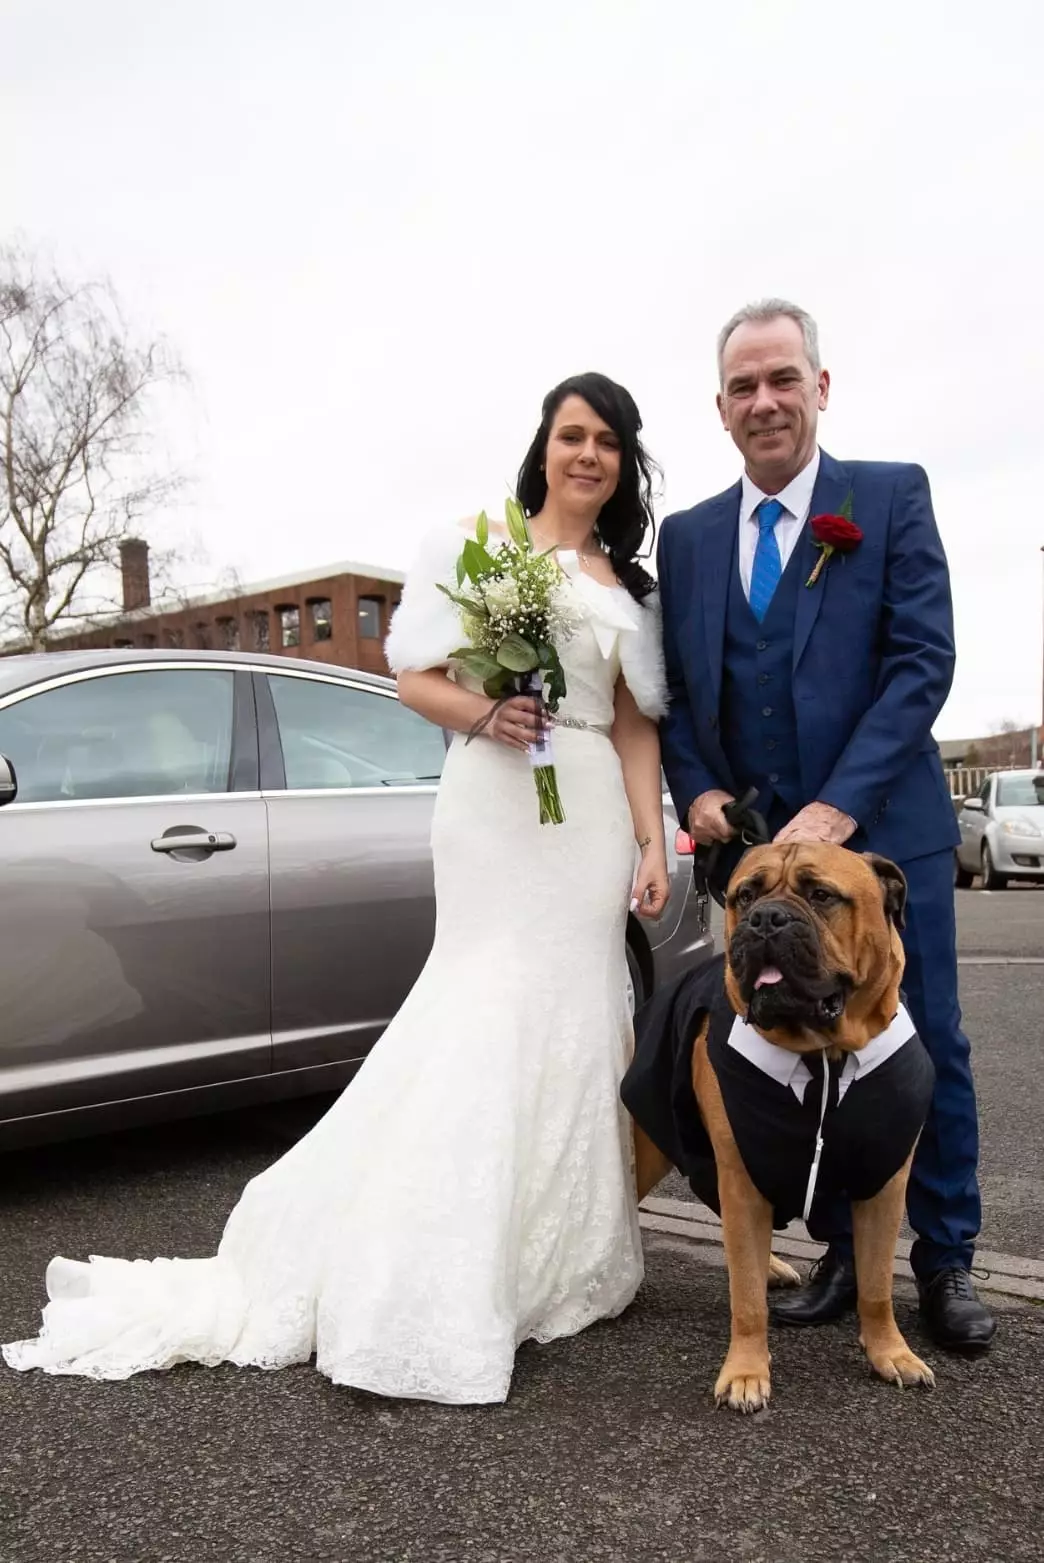 Estelle said all the hassle of rearranging the wedding was worth it to have Brucie there.